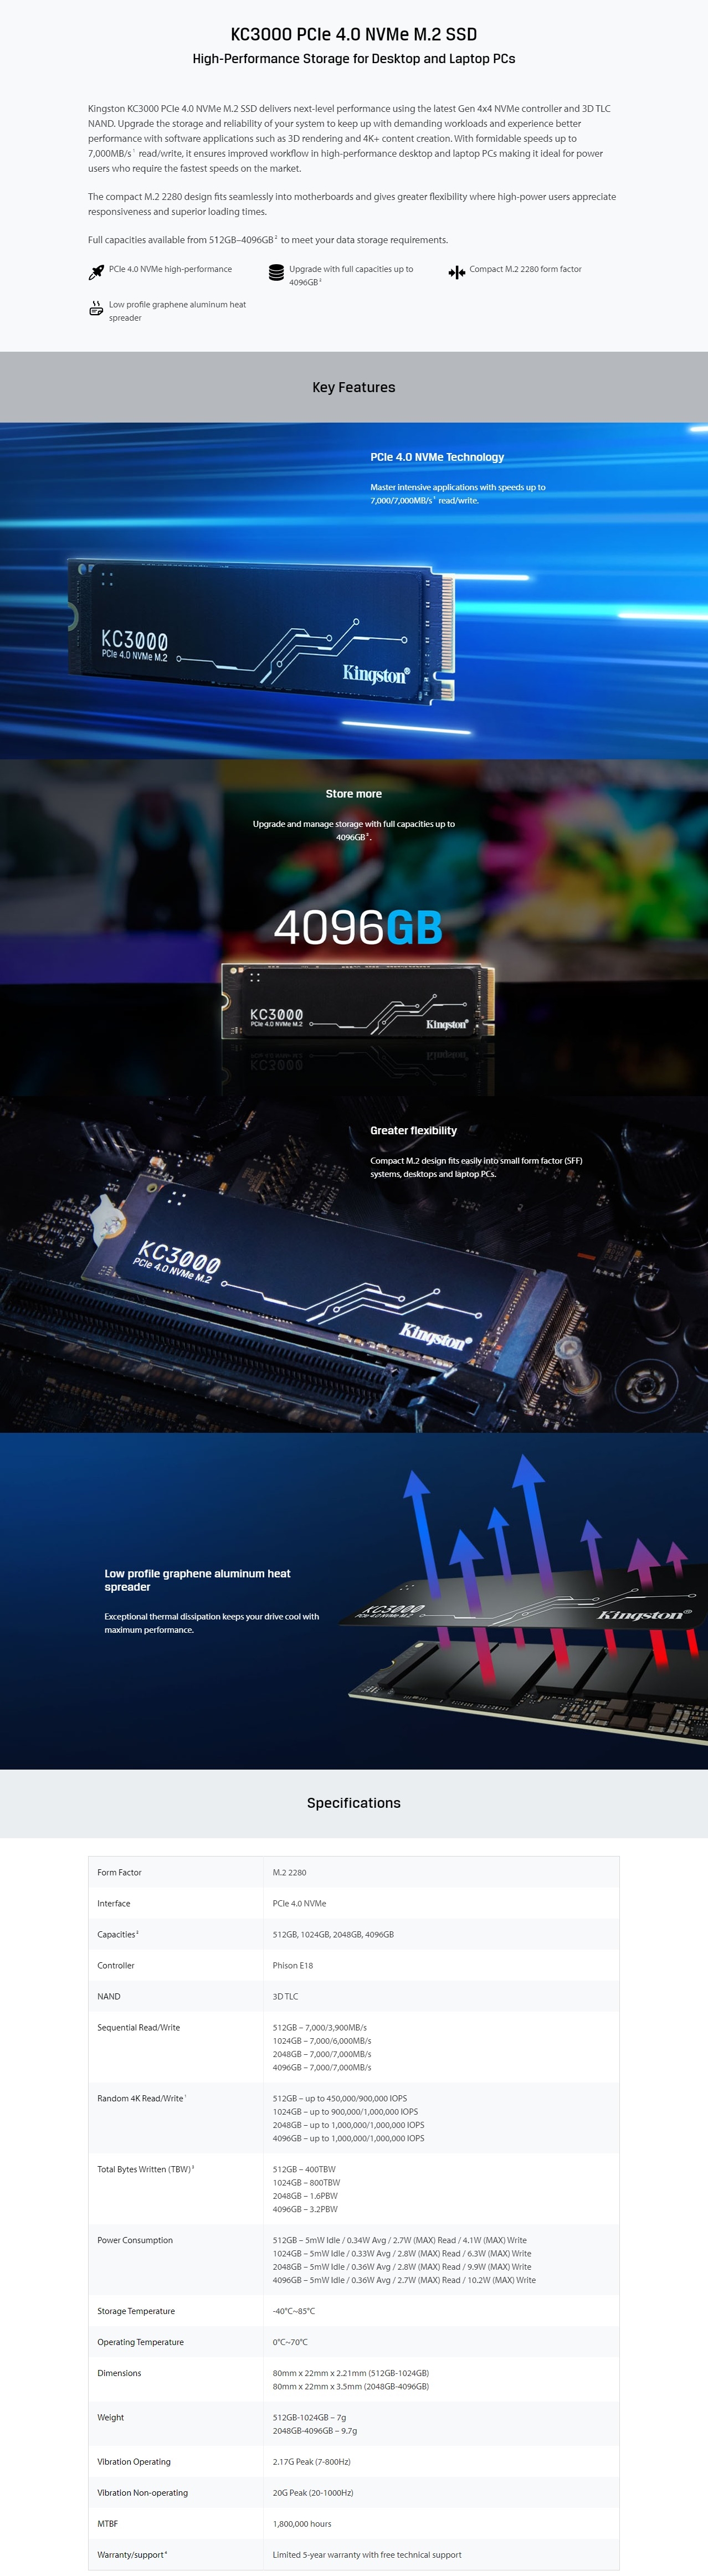 A large marketing image providing additional information about the product Kingston KC3000 PCIe Gen4 NVMe M.2 SSD - 512GB - Additional alt info not provided